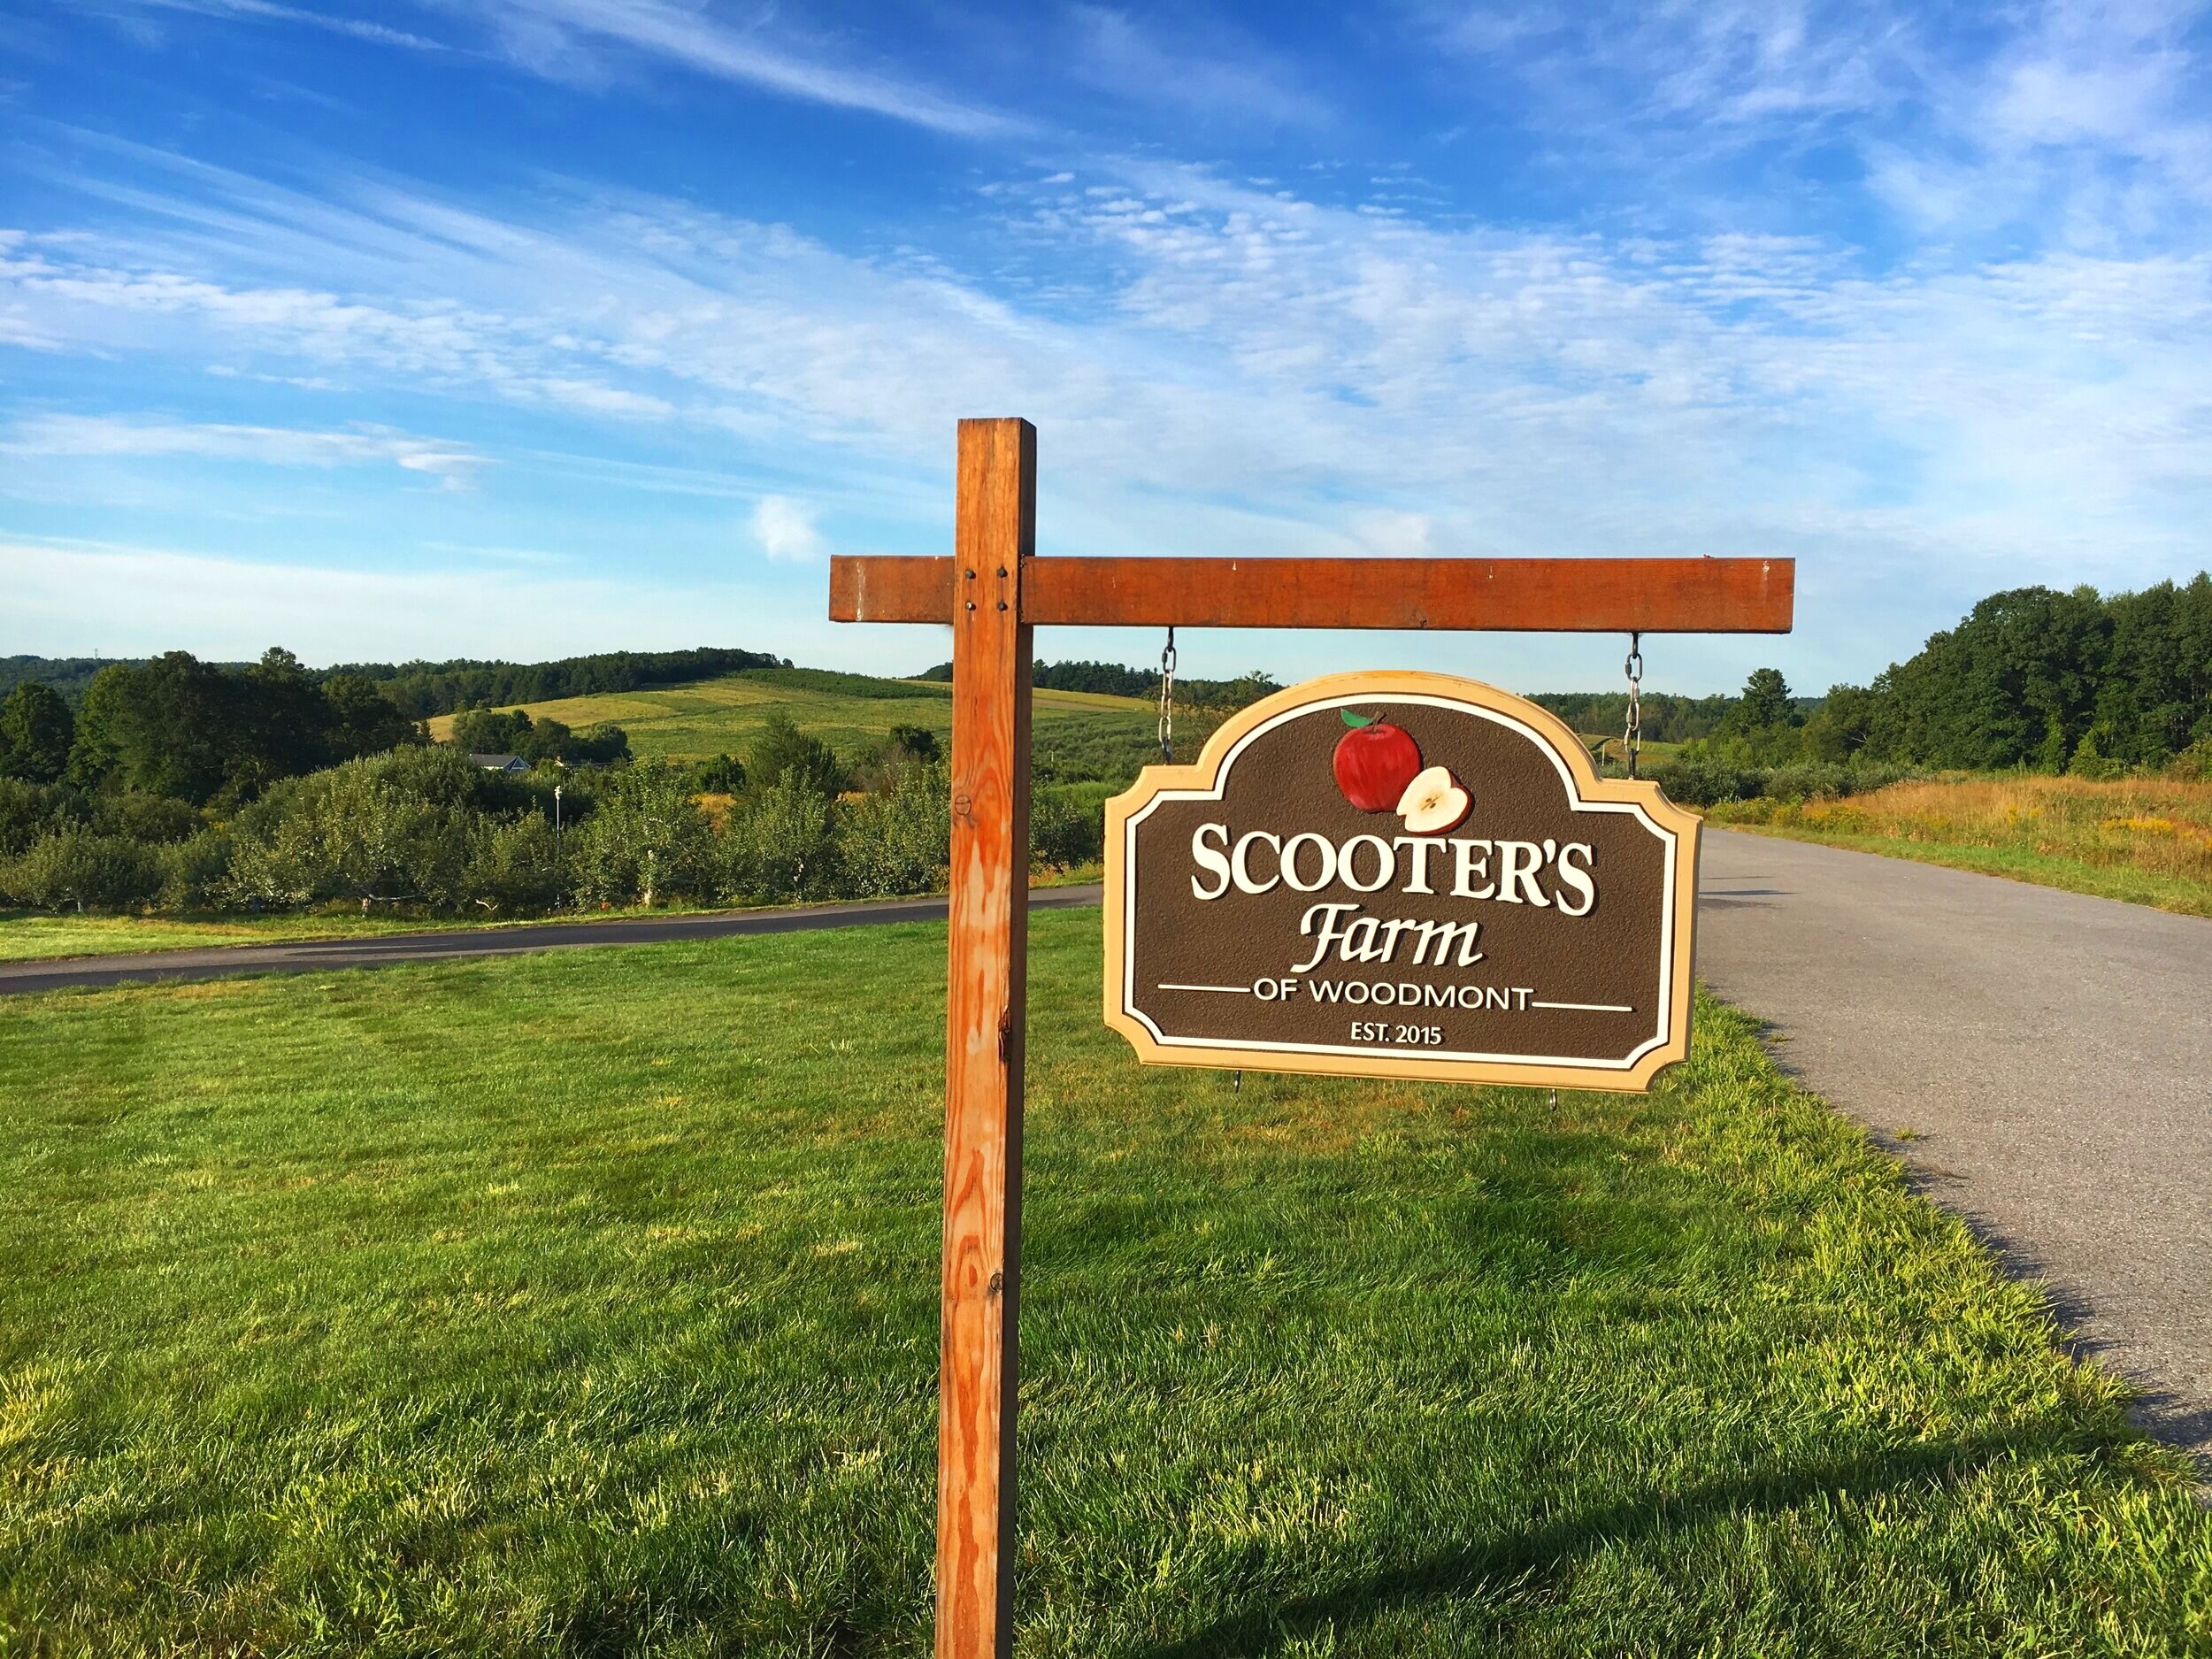 About — Scooter's Farm of Woodmont